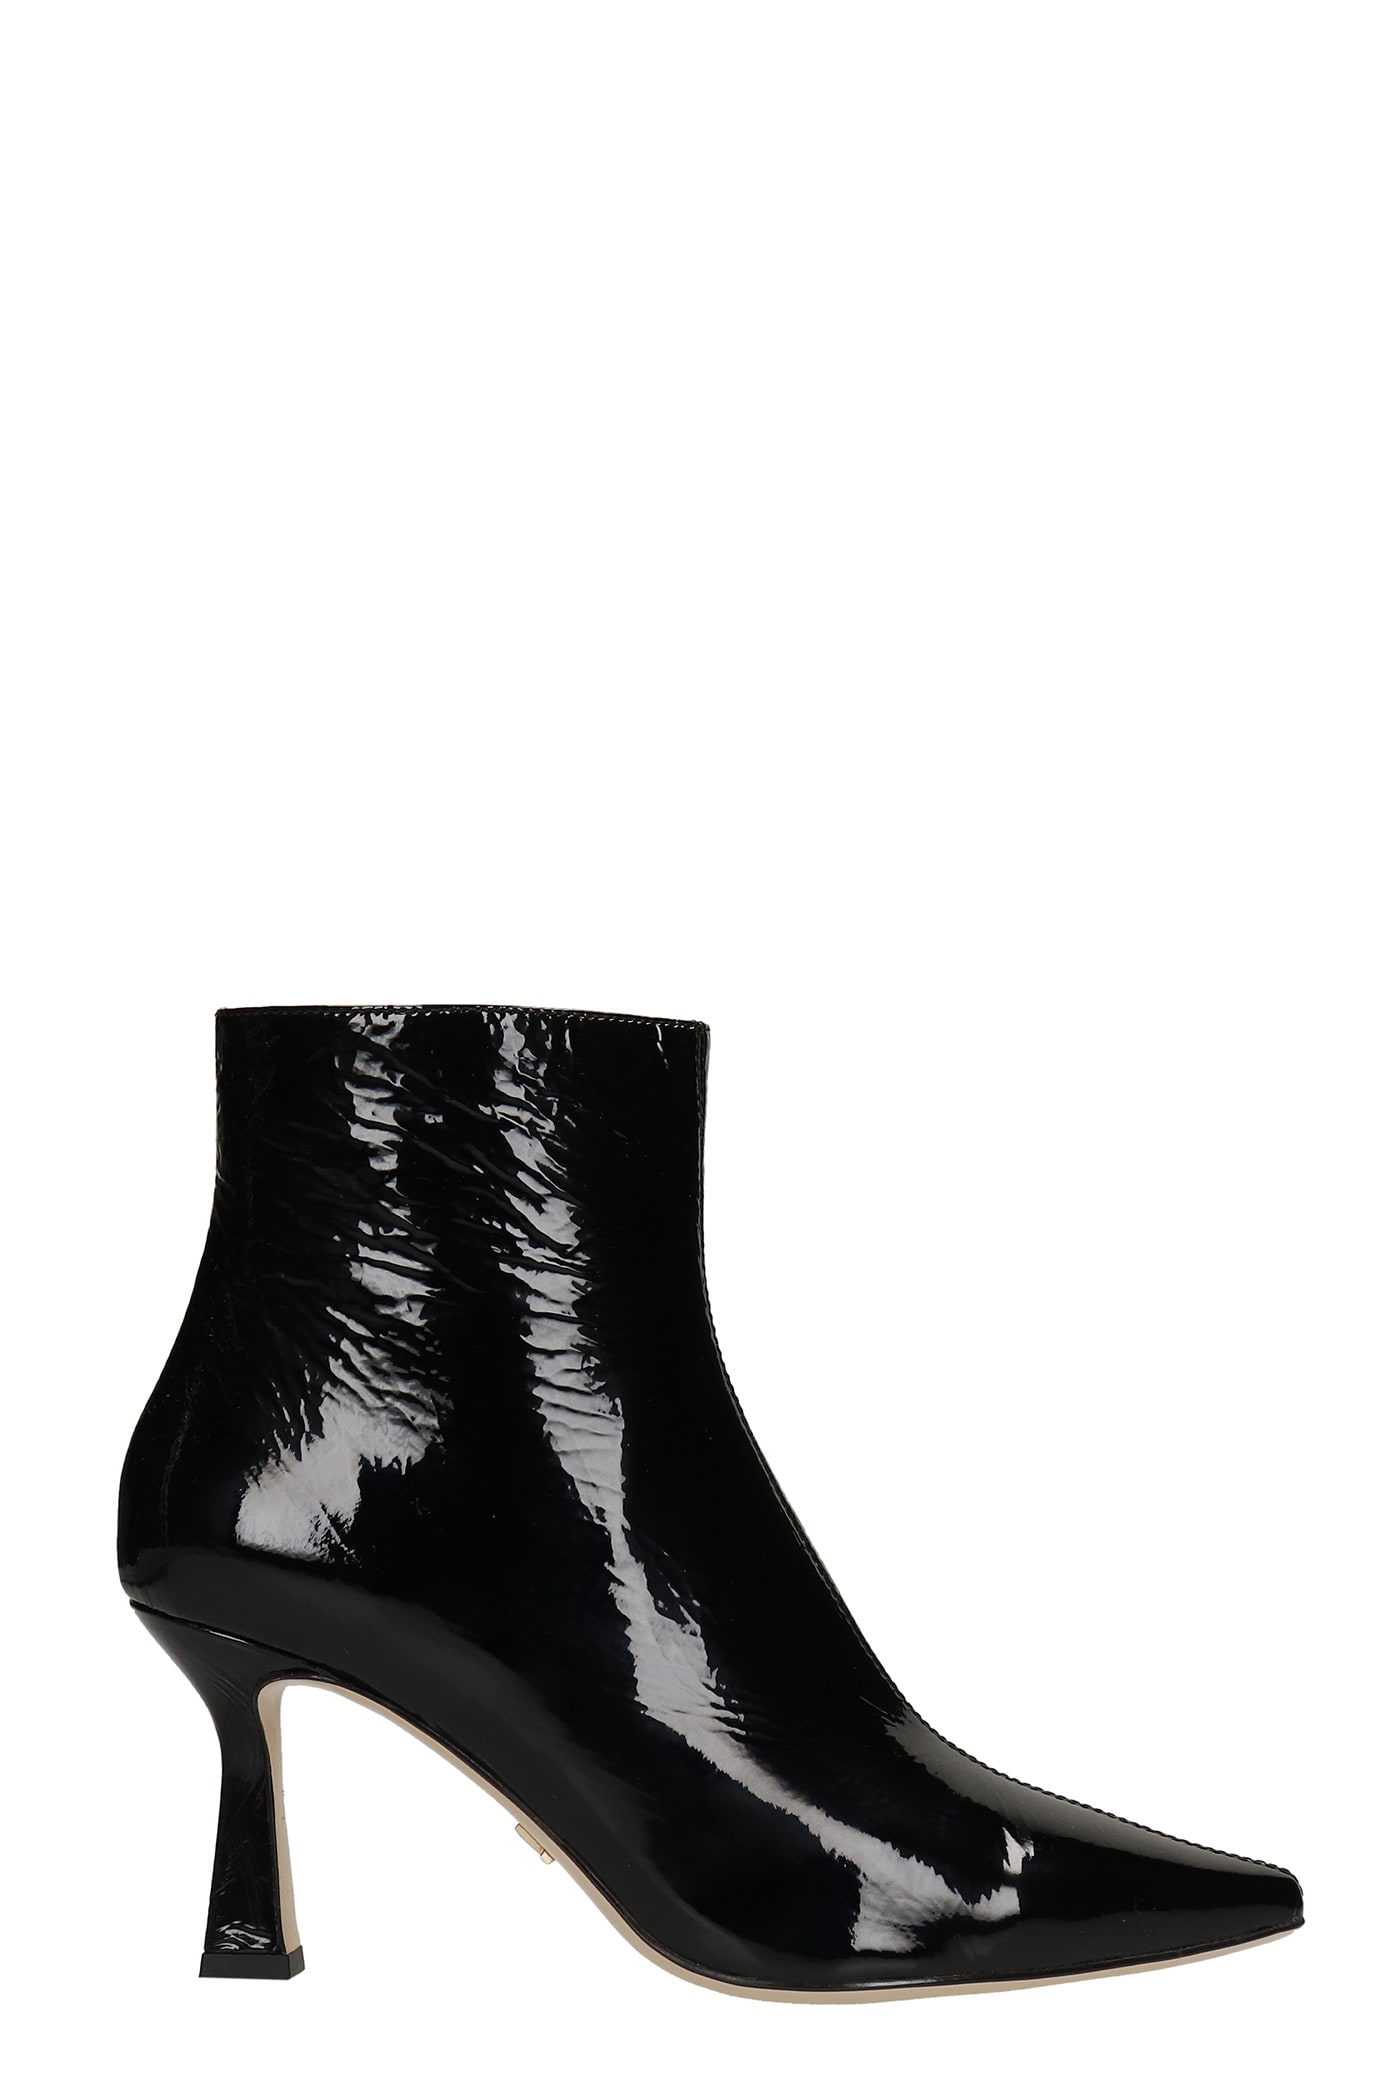 Lola Cruz High Heels Ankle Boots In Black Patent Leather